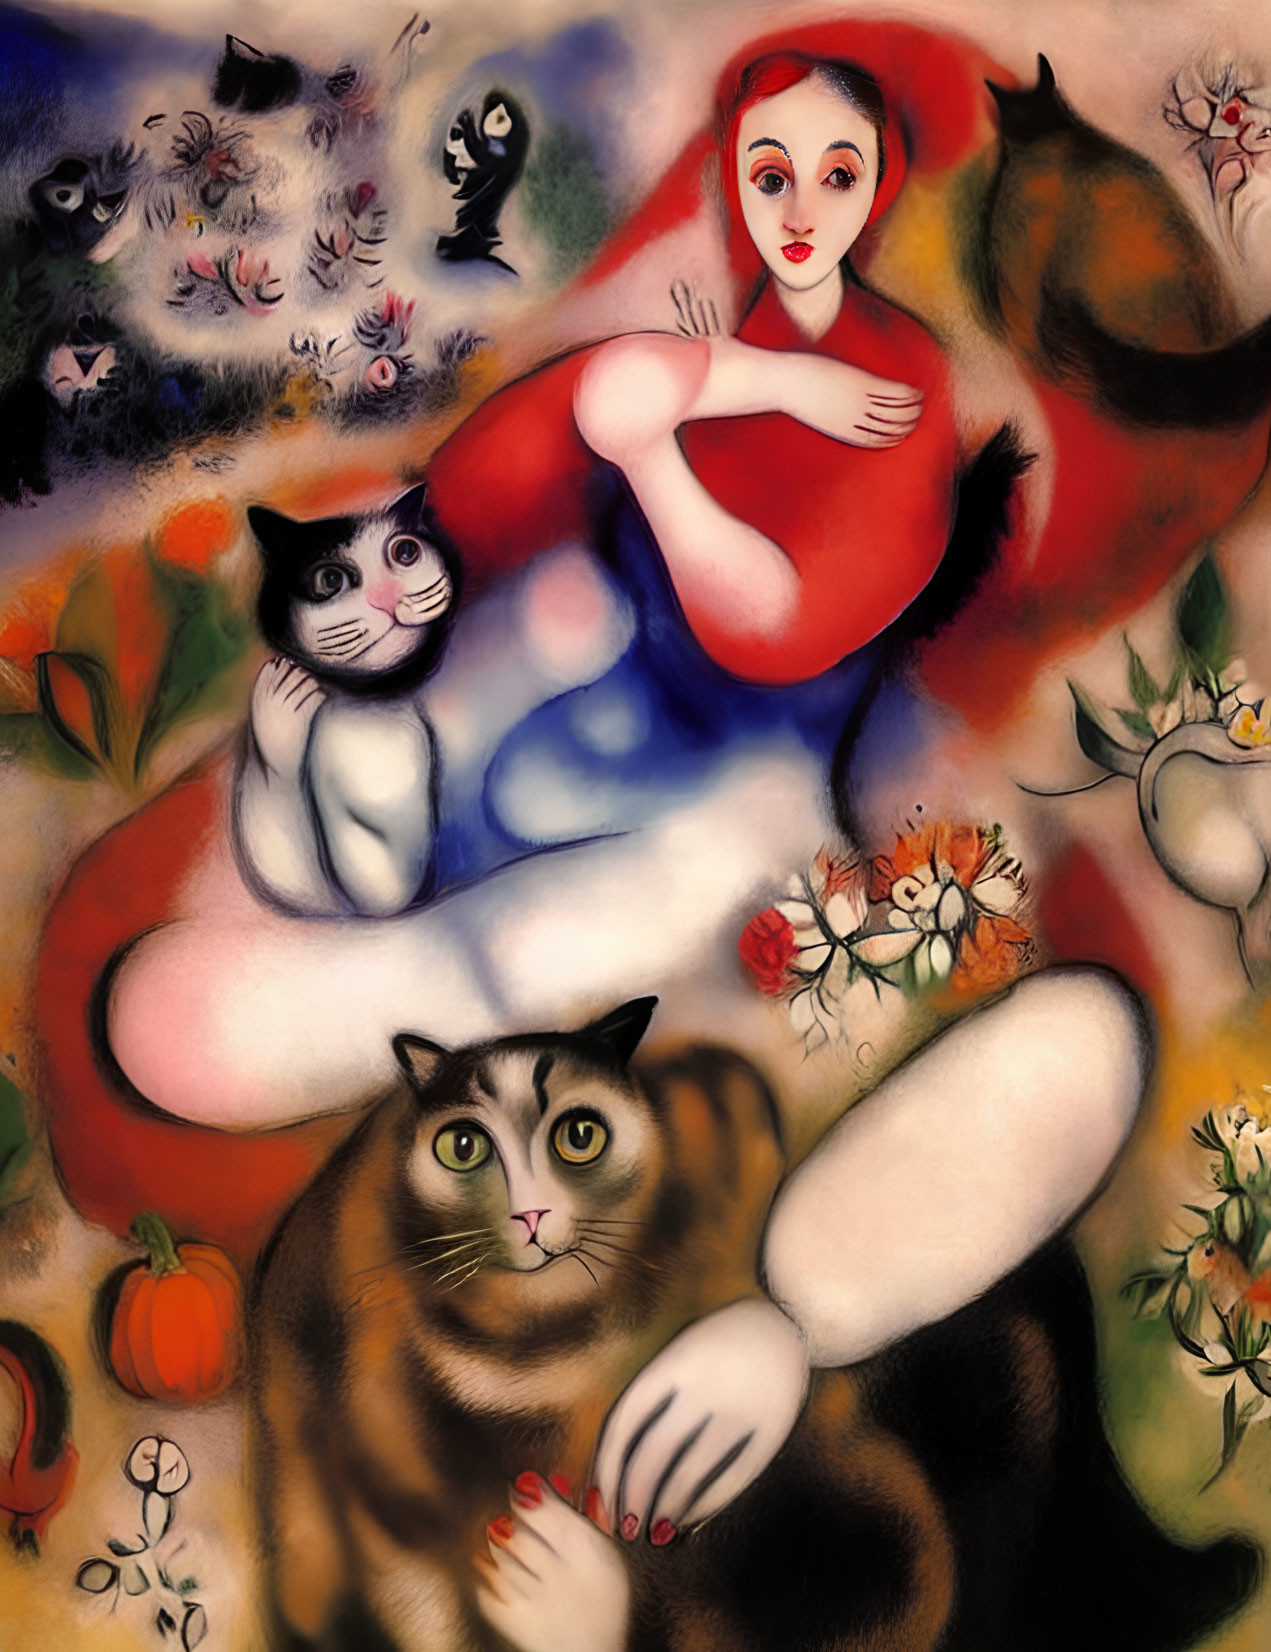 Surreal painting of woman with red headscarf holding cat surrounded by whimsical felines and